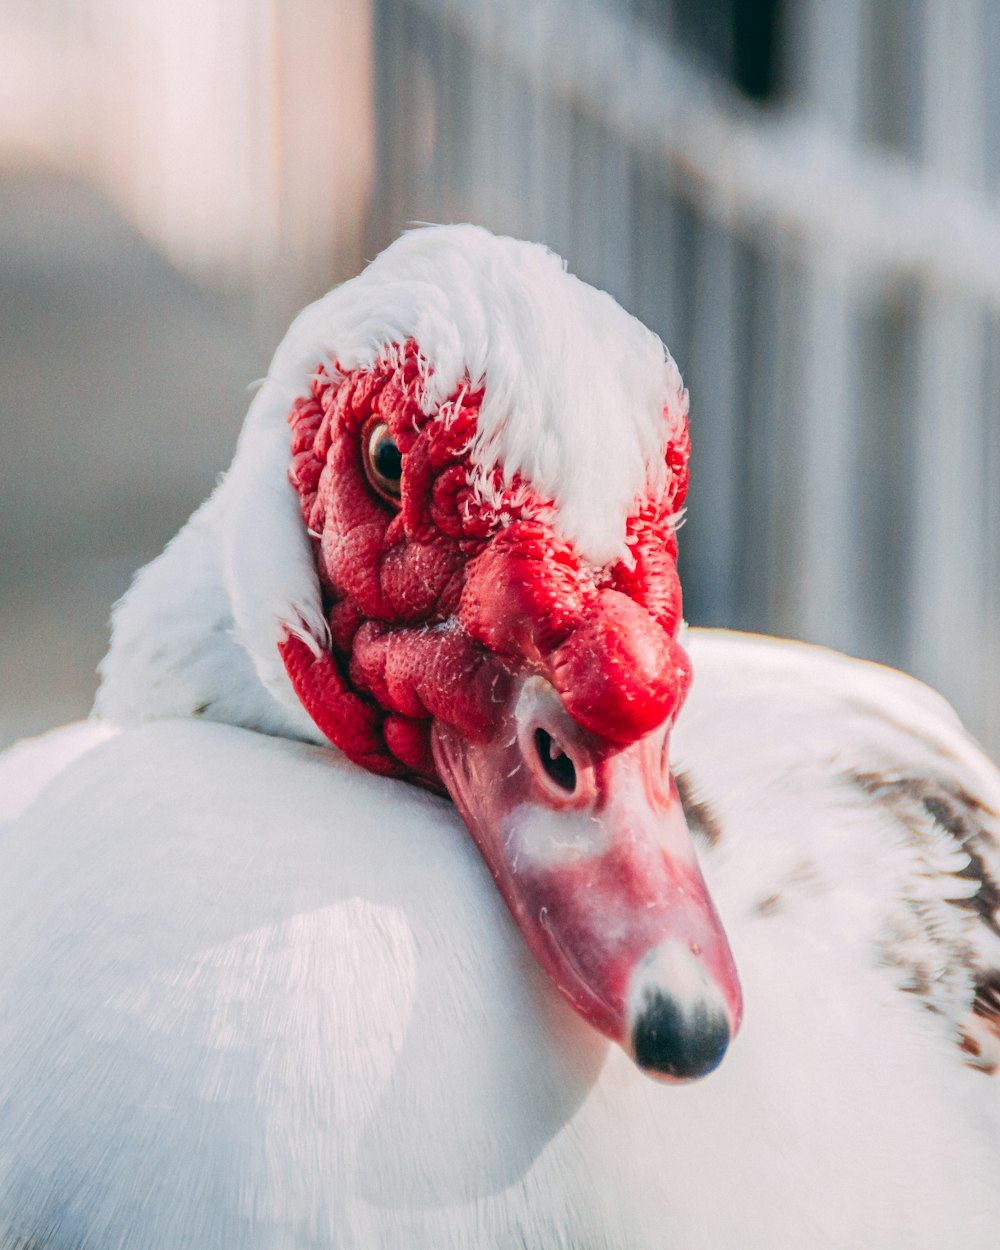 selective focus photography of white goose